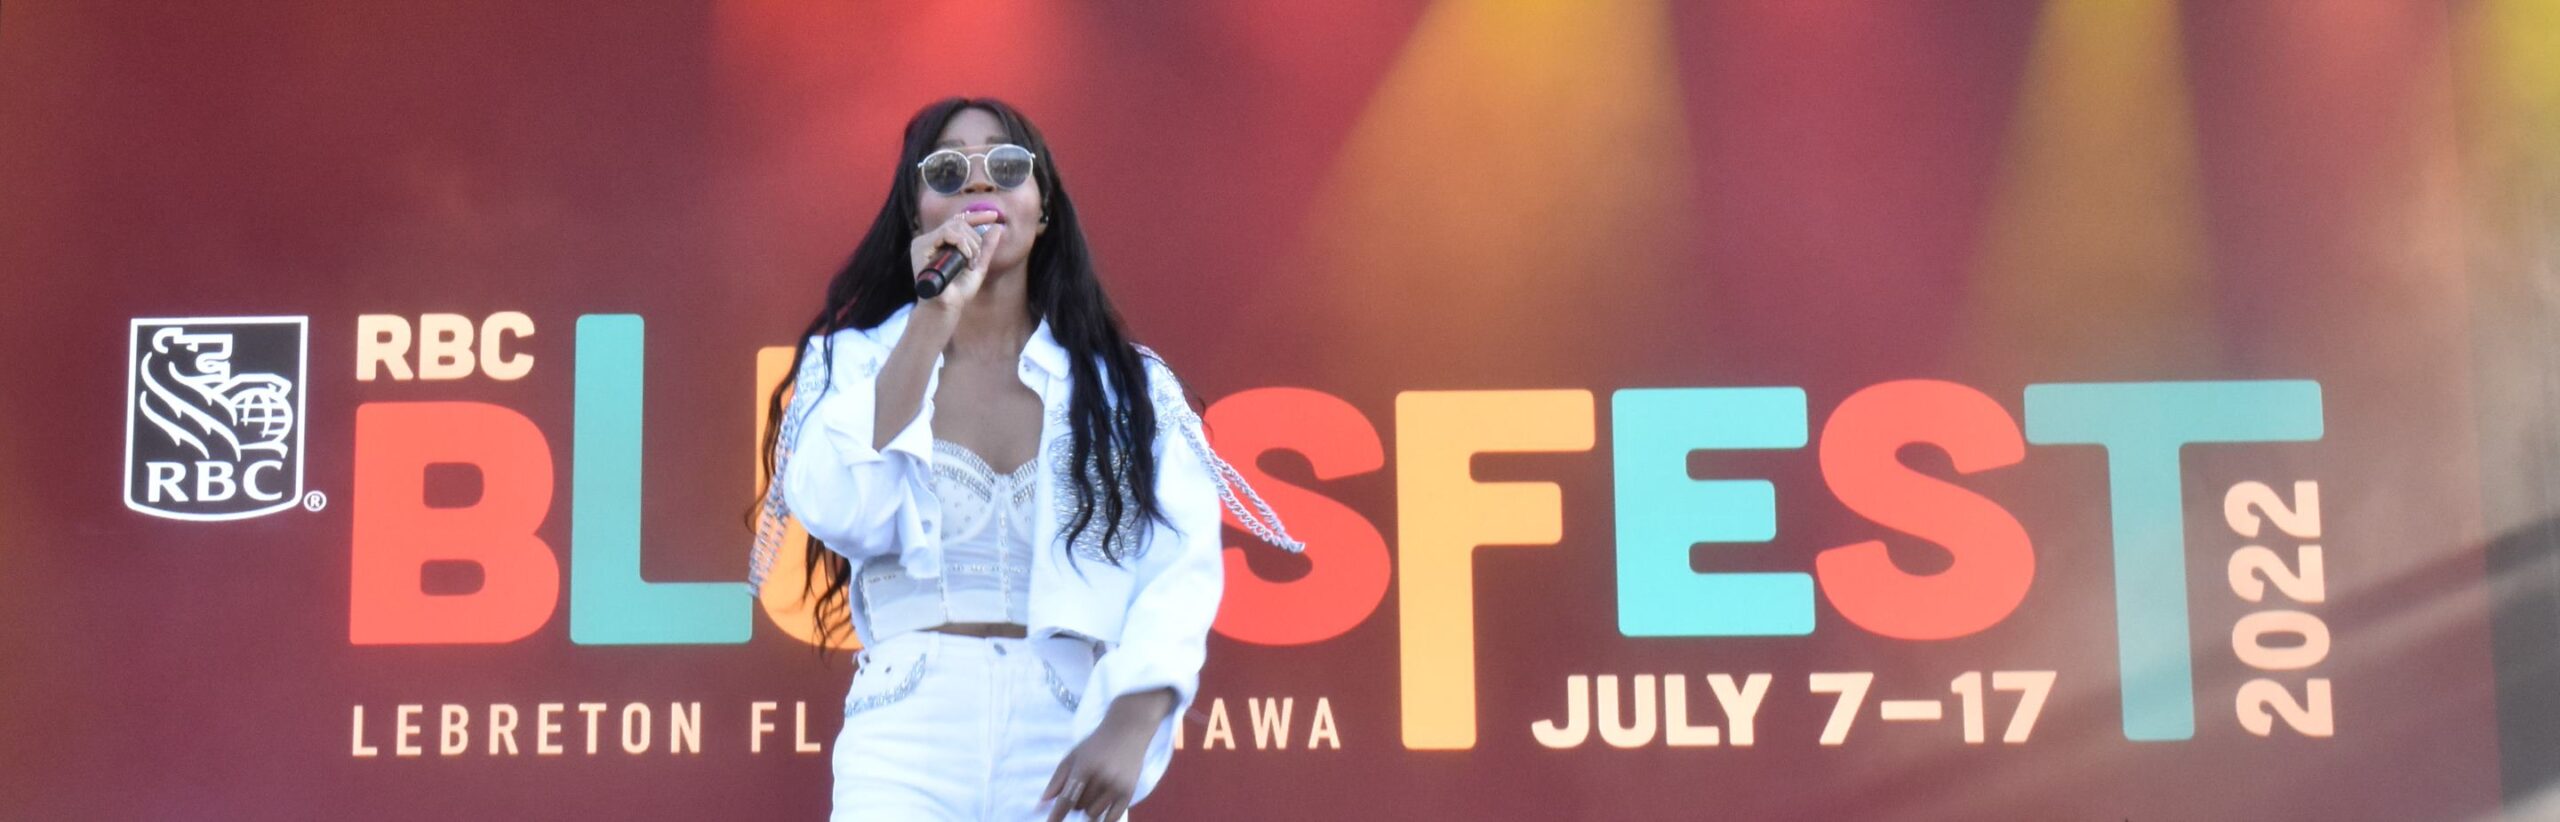 Sacha performing on the RBC stage at BluesFest, July 2022.